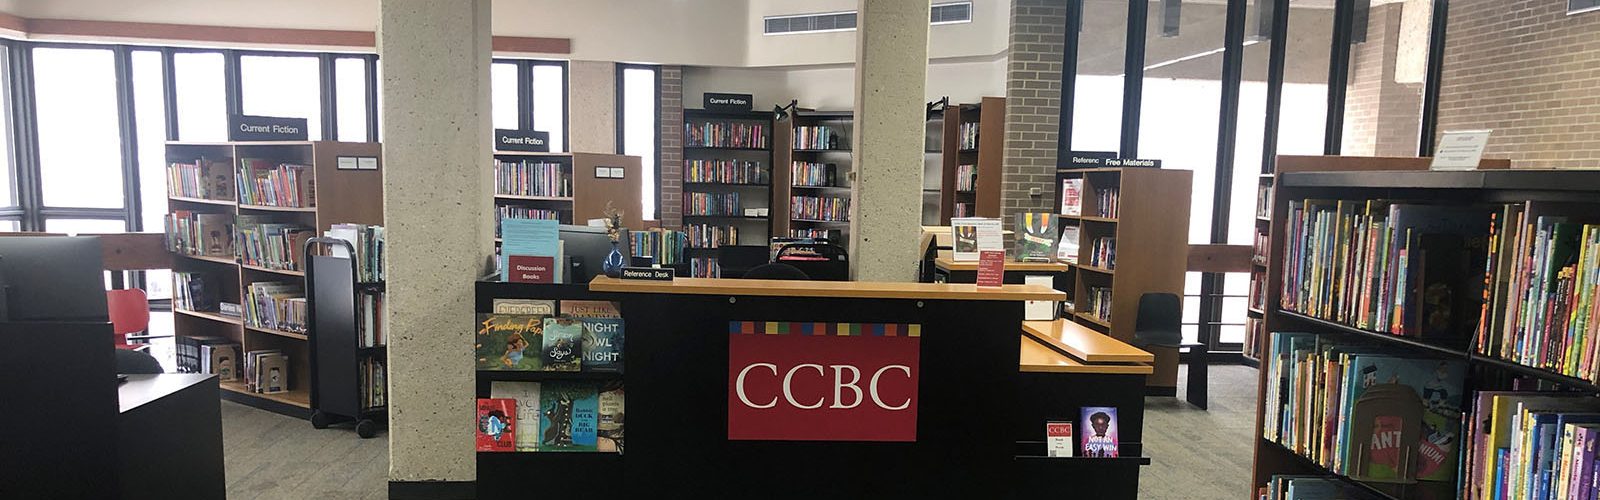 CCBC reference desk